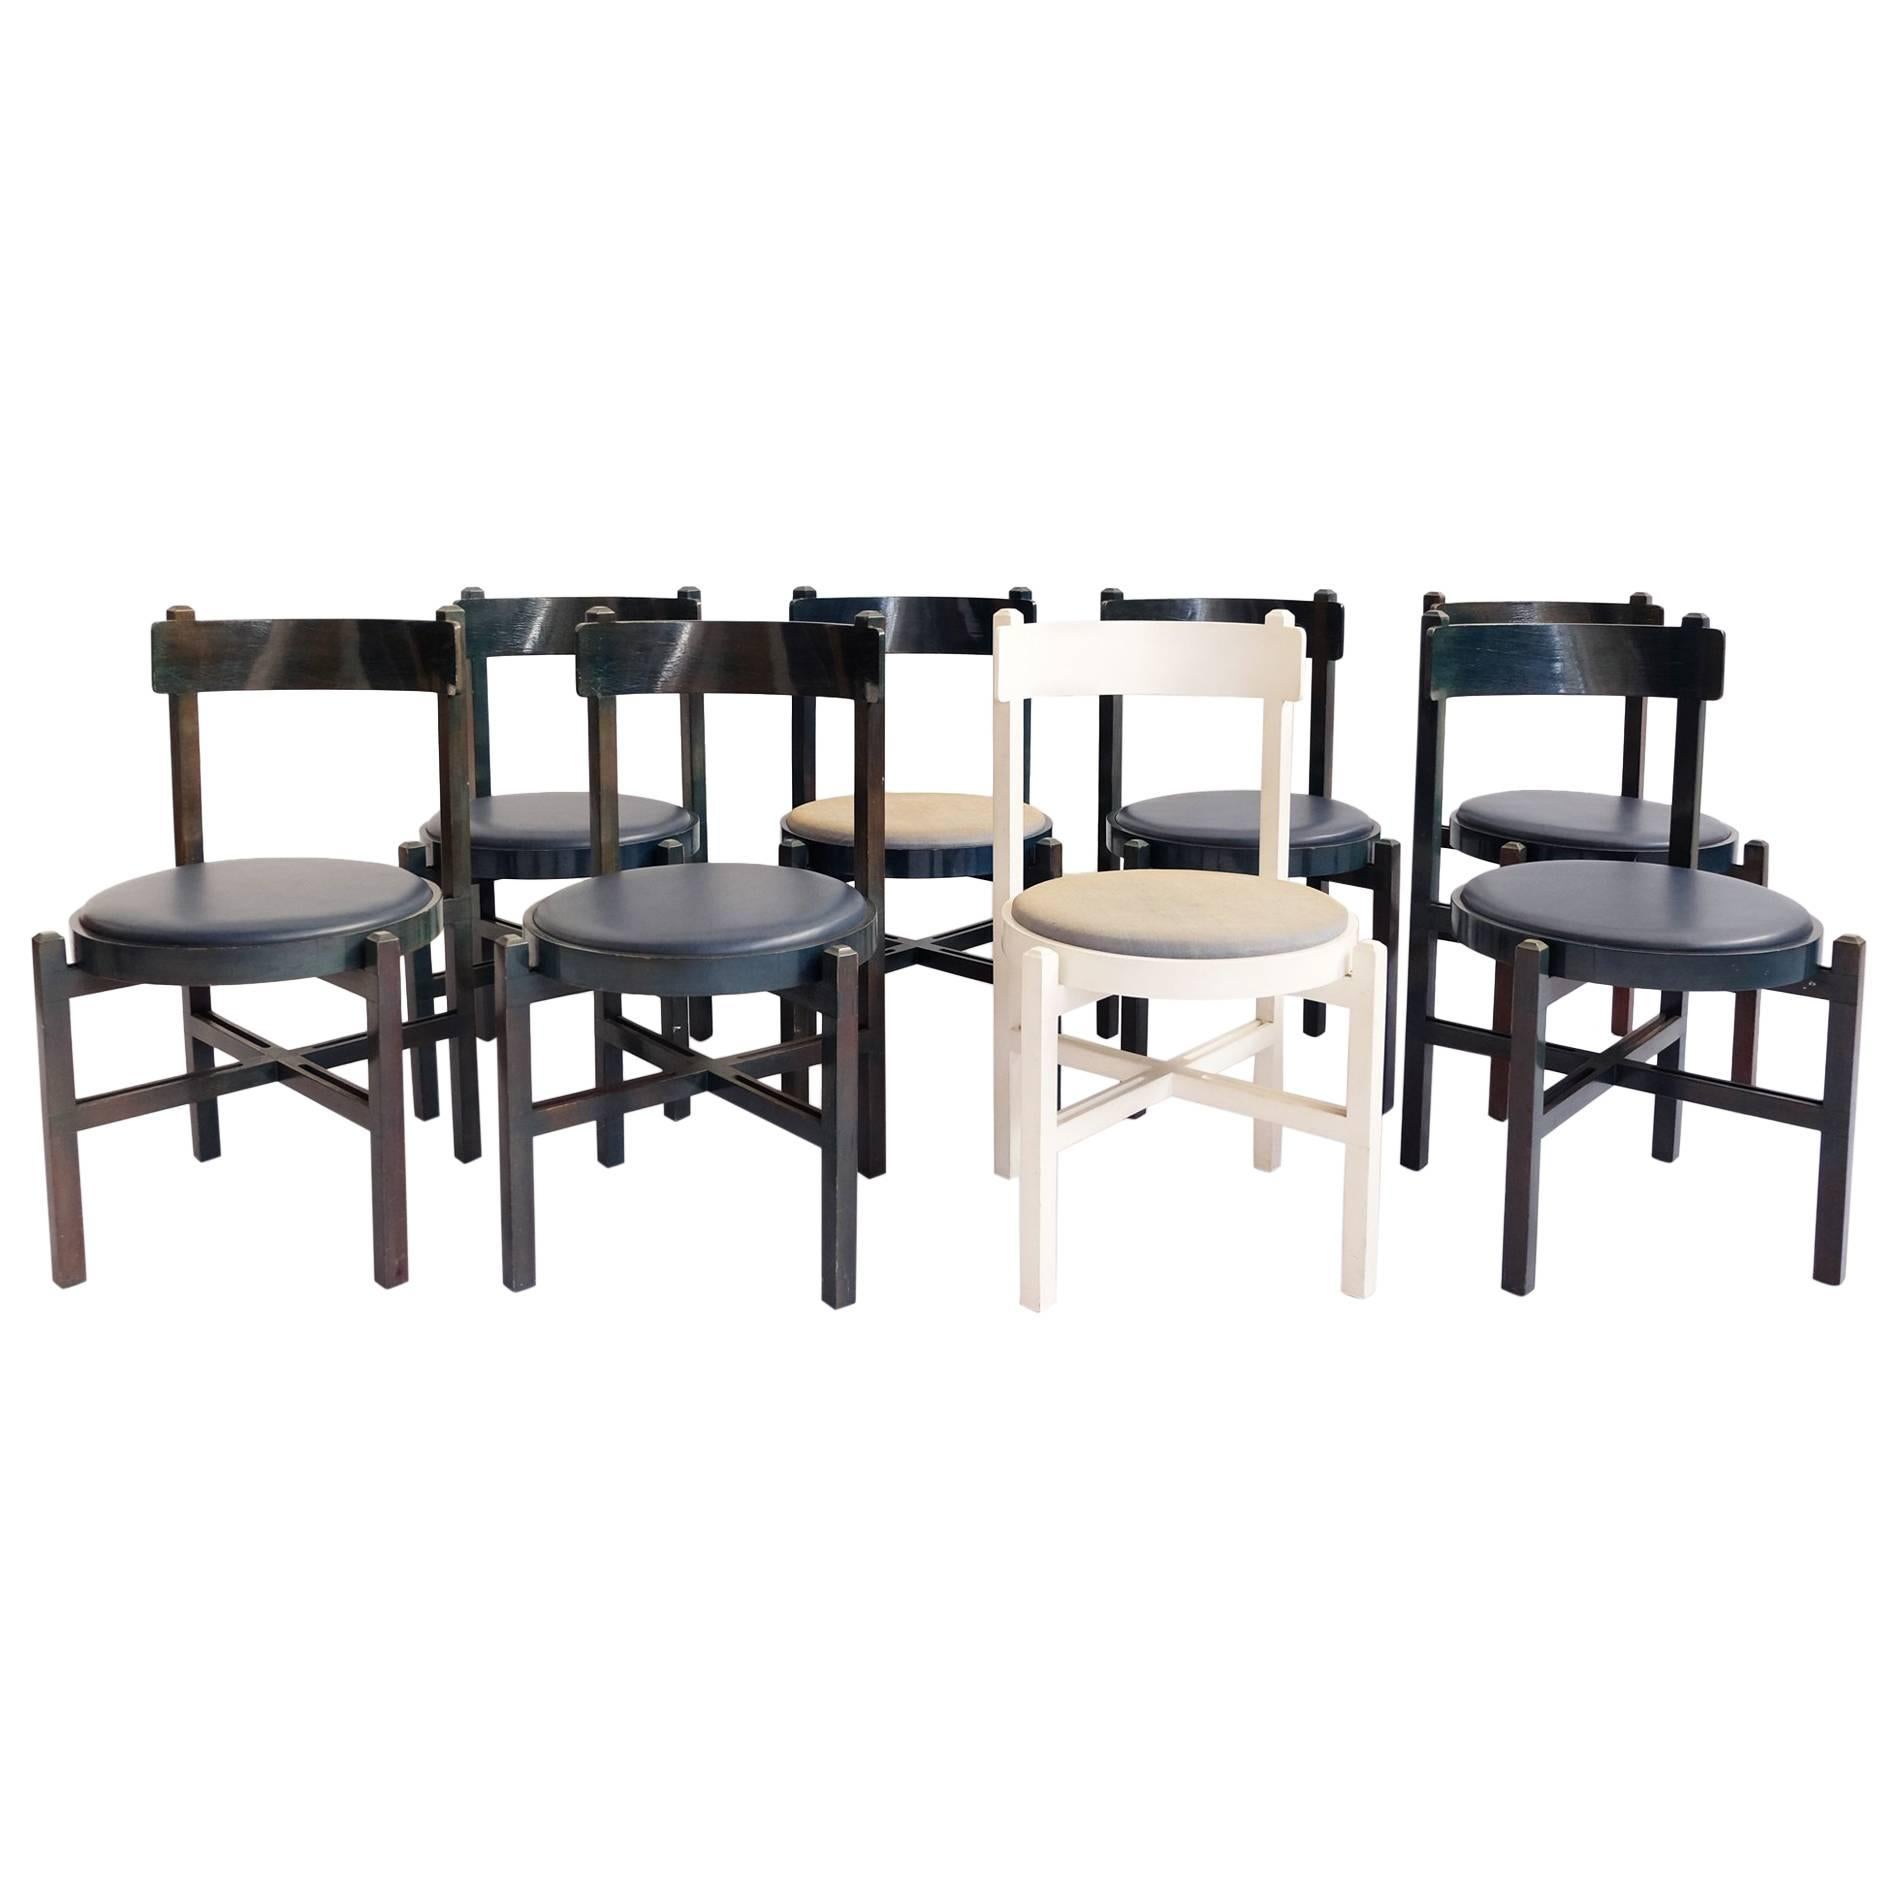 Set of eight Super Rare Chairs Attributed to Gianfranco Frattini, Cassina, 1962 For Sale